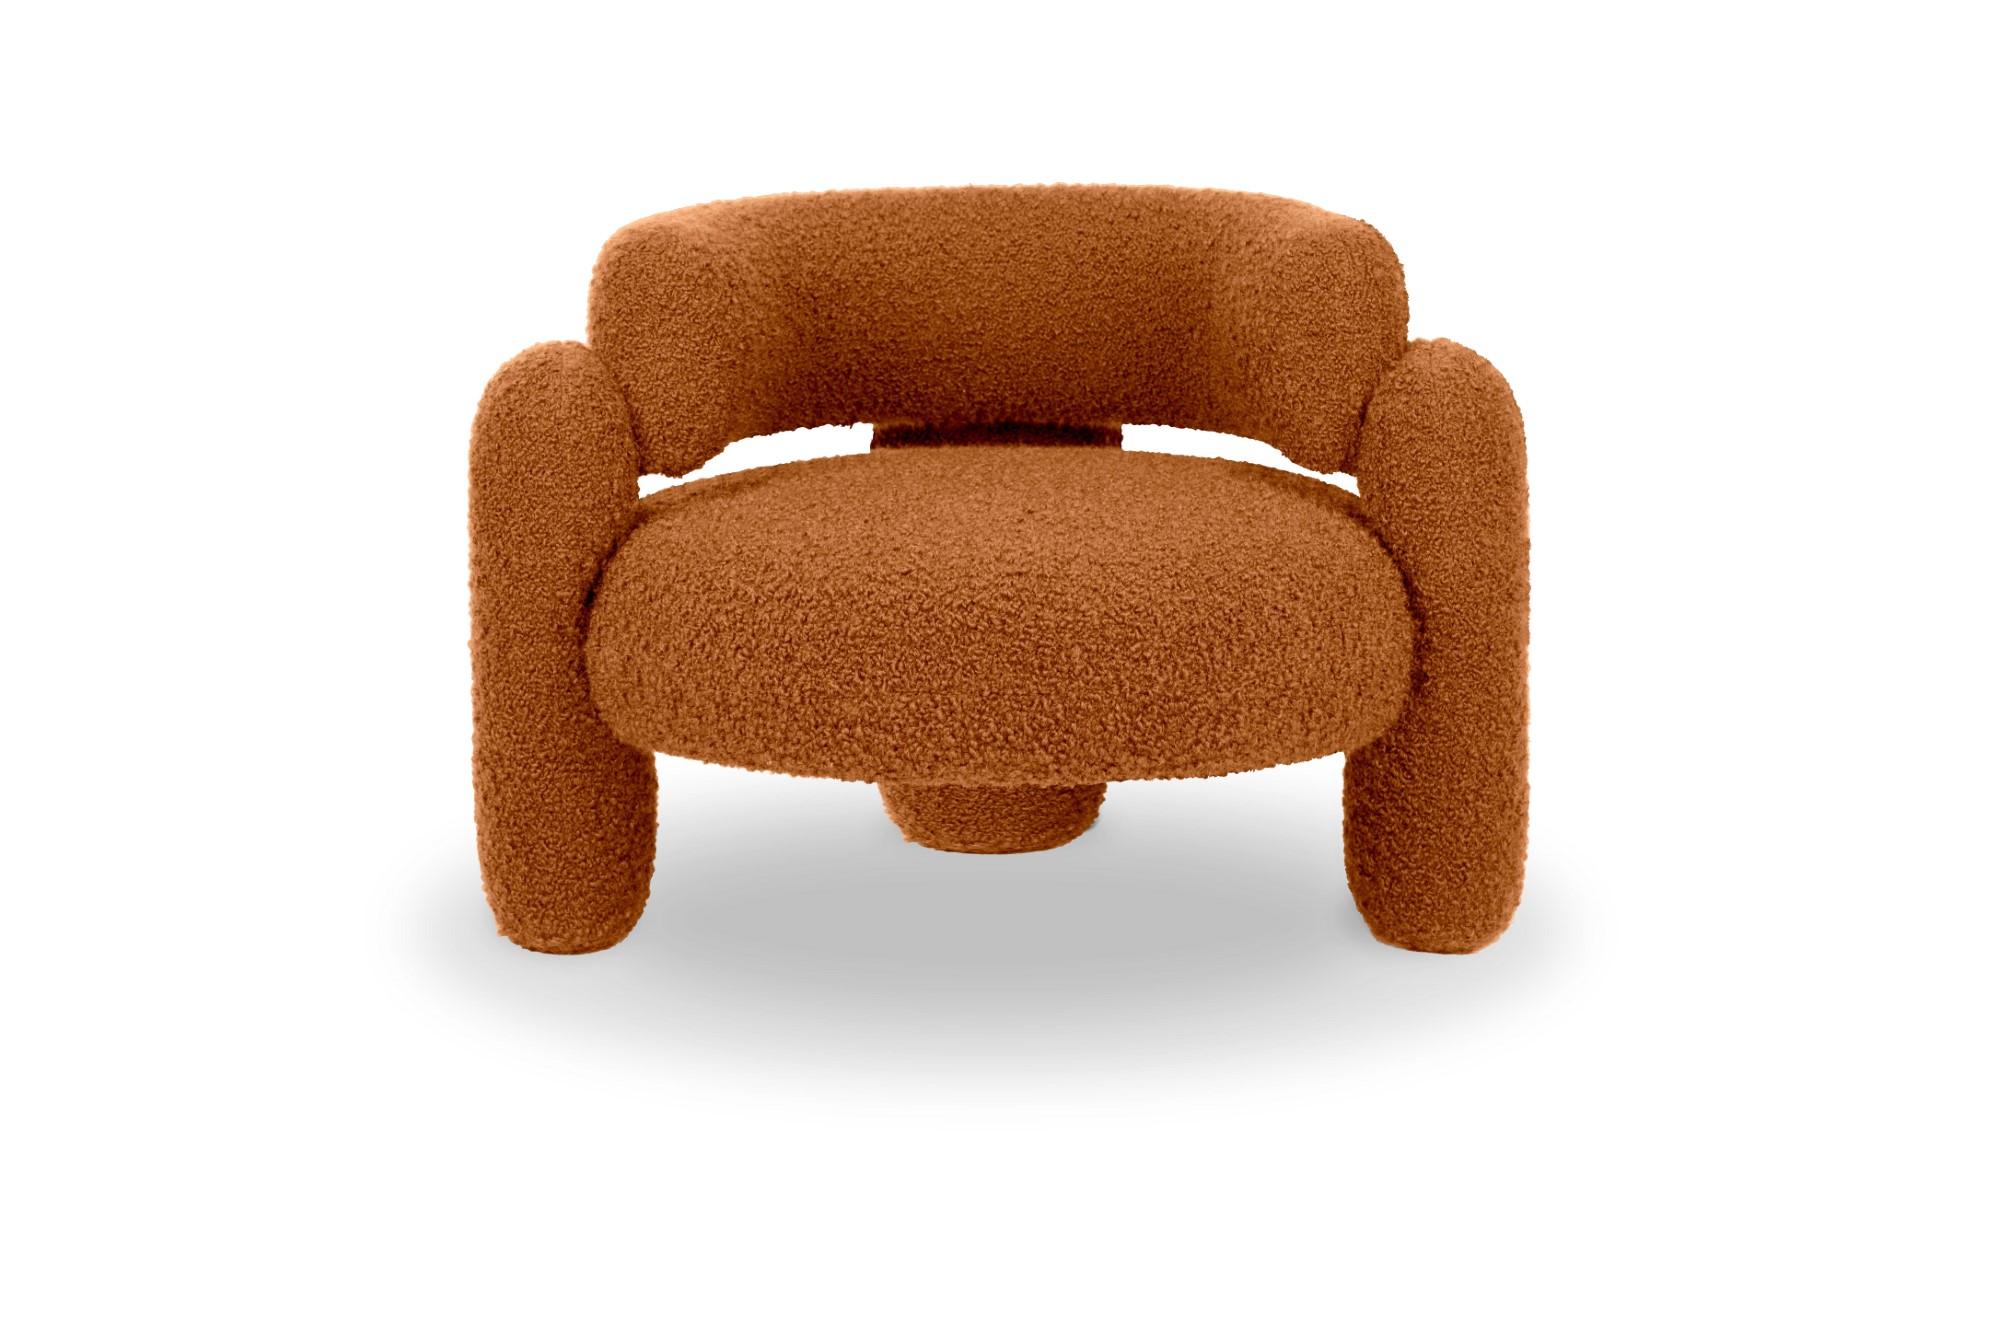 Embrace Cormo Persimmon armchair by Royal Stranger
Dimensions: W 96 x D 85 x H 68 cm.
Different upholstery colors and finishes are available.
Materials: Upholstery.

Featuring an enfolding composition of geometrical shapes, the Embrace Armchair will